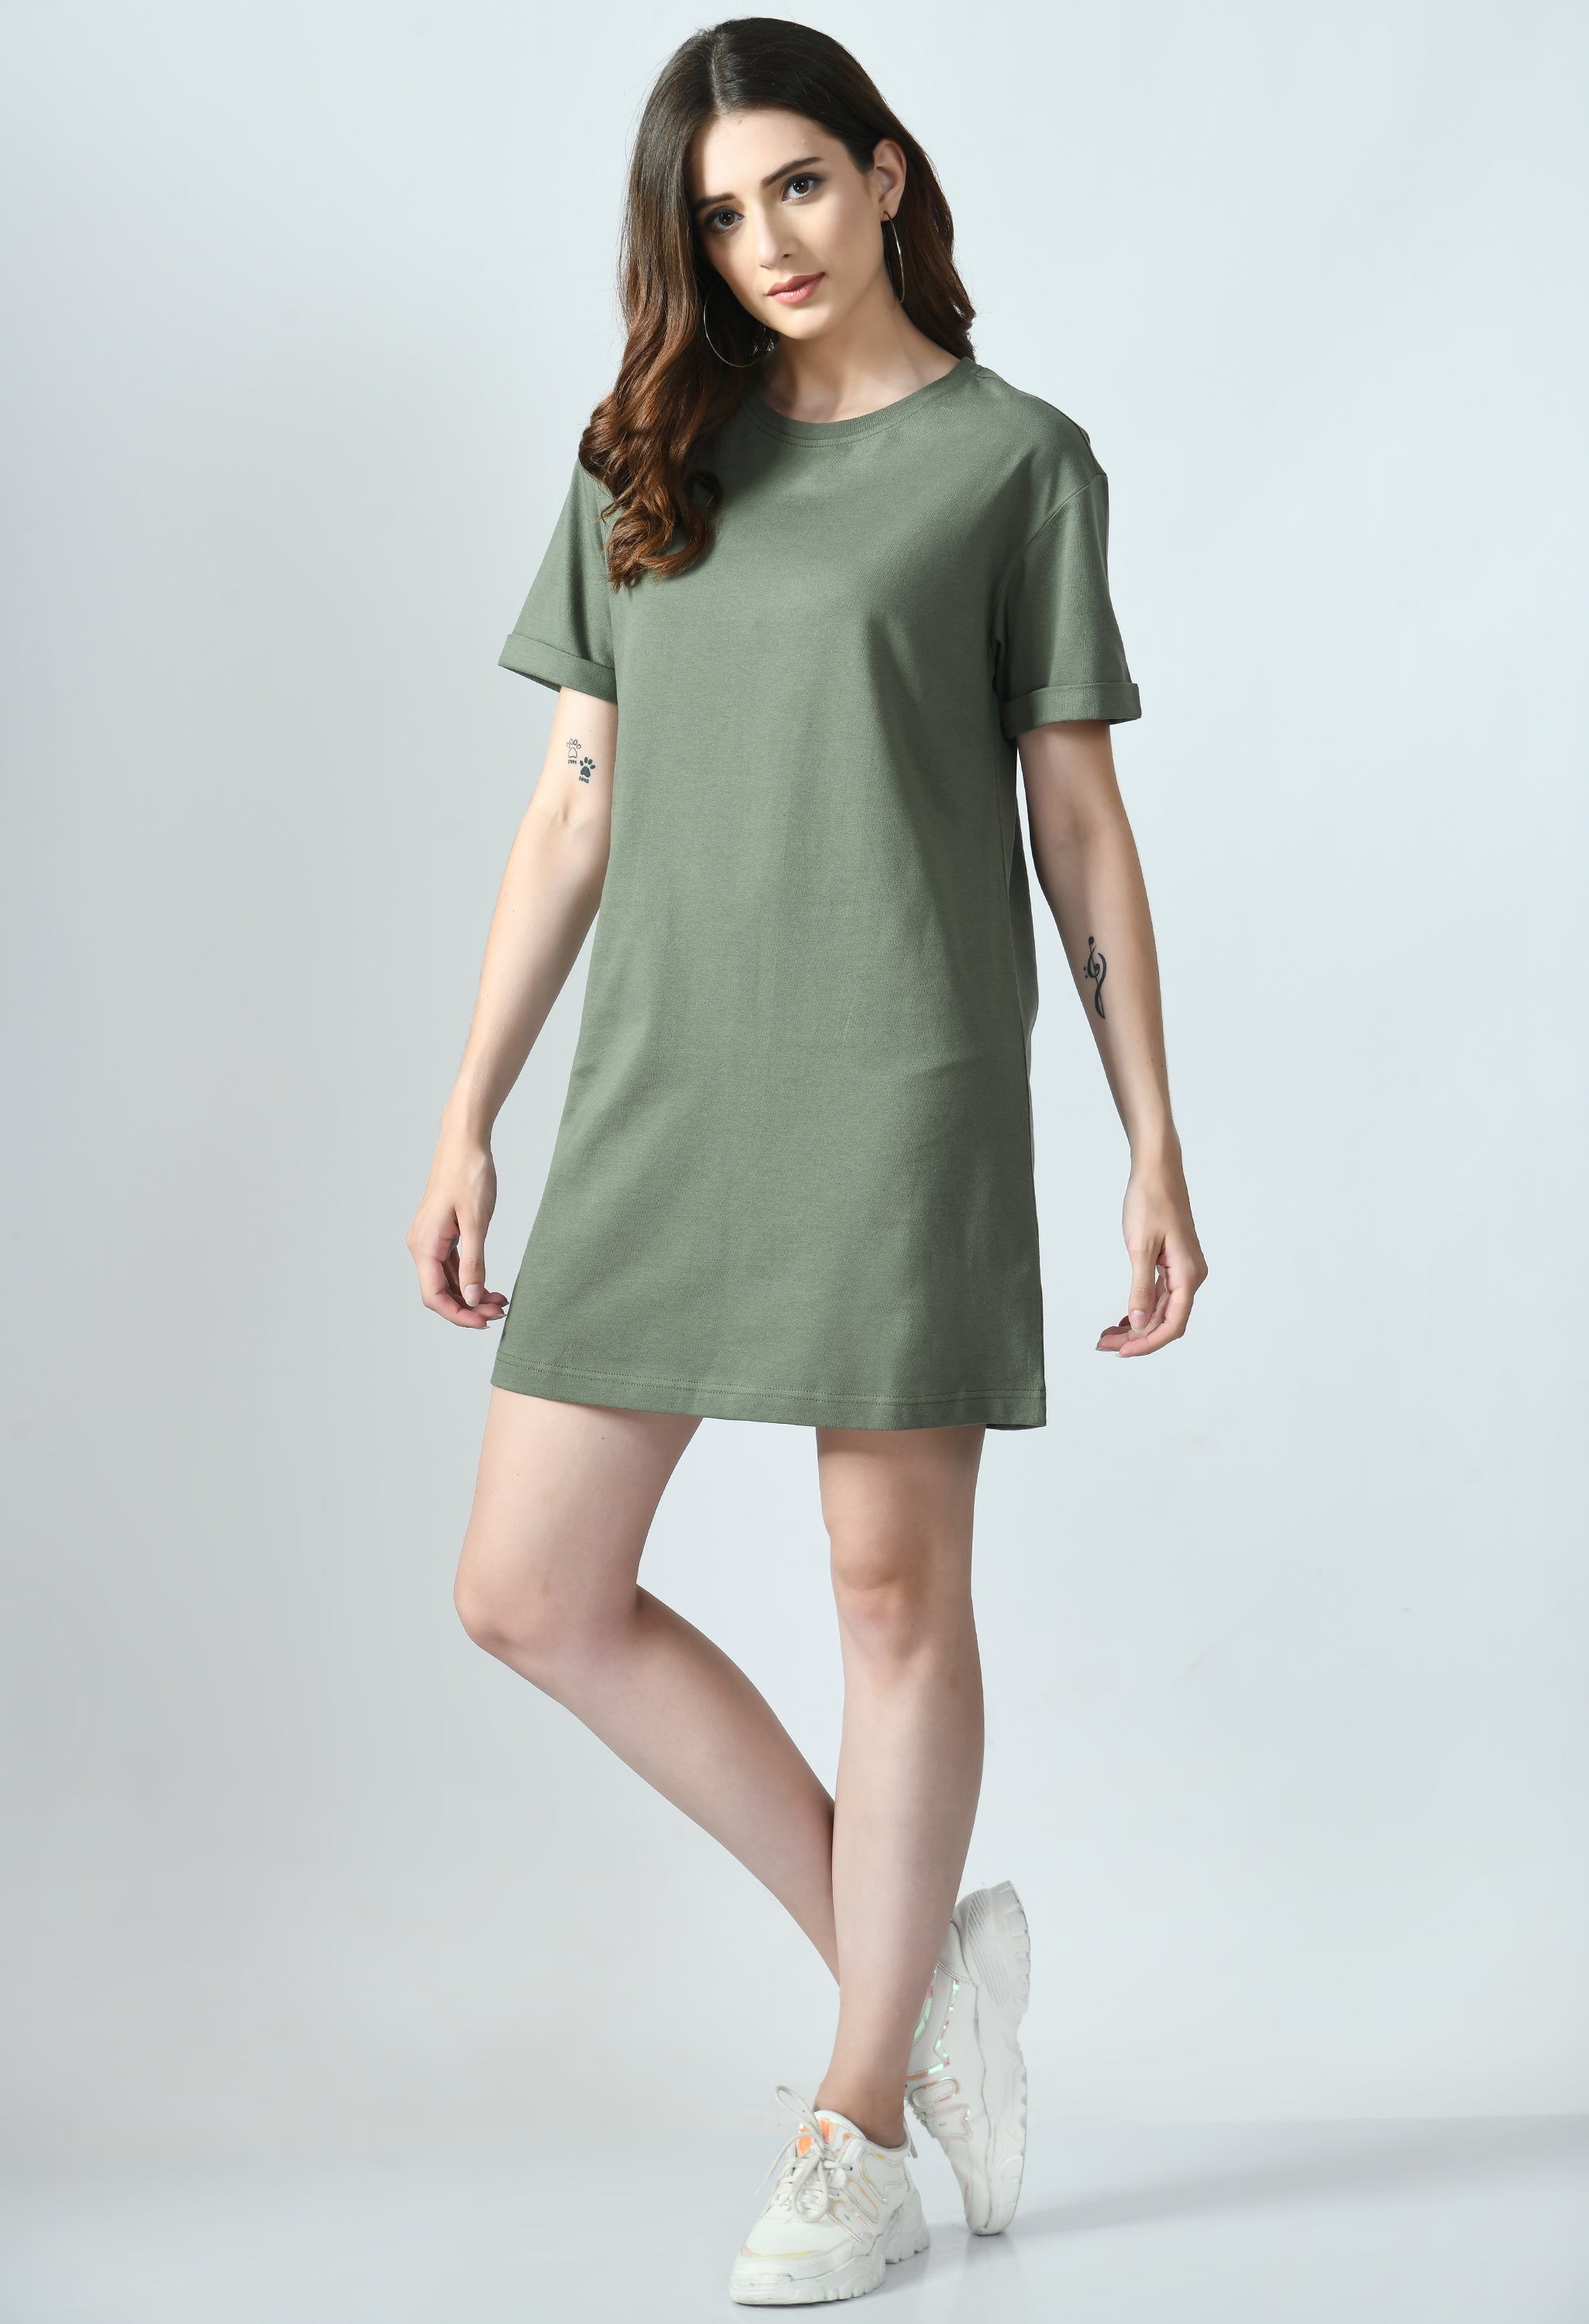 T-shirt Dress With Roll-Up Sleeves